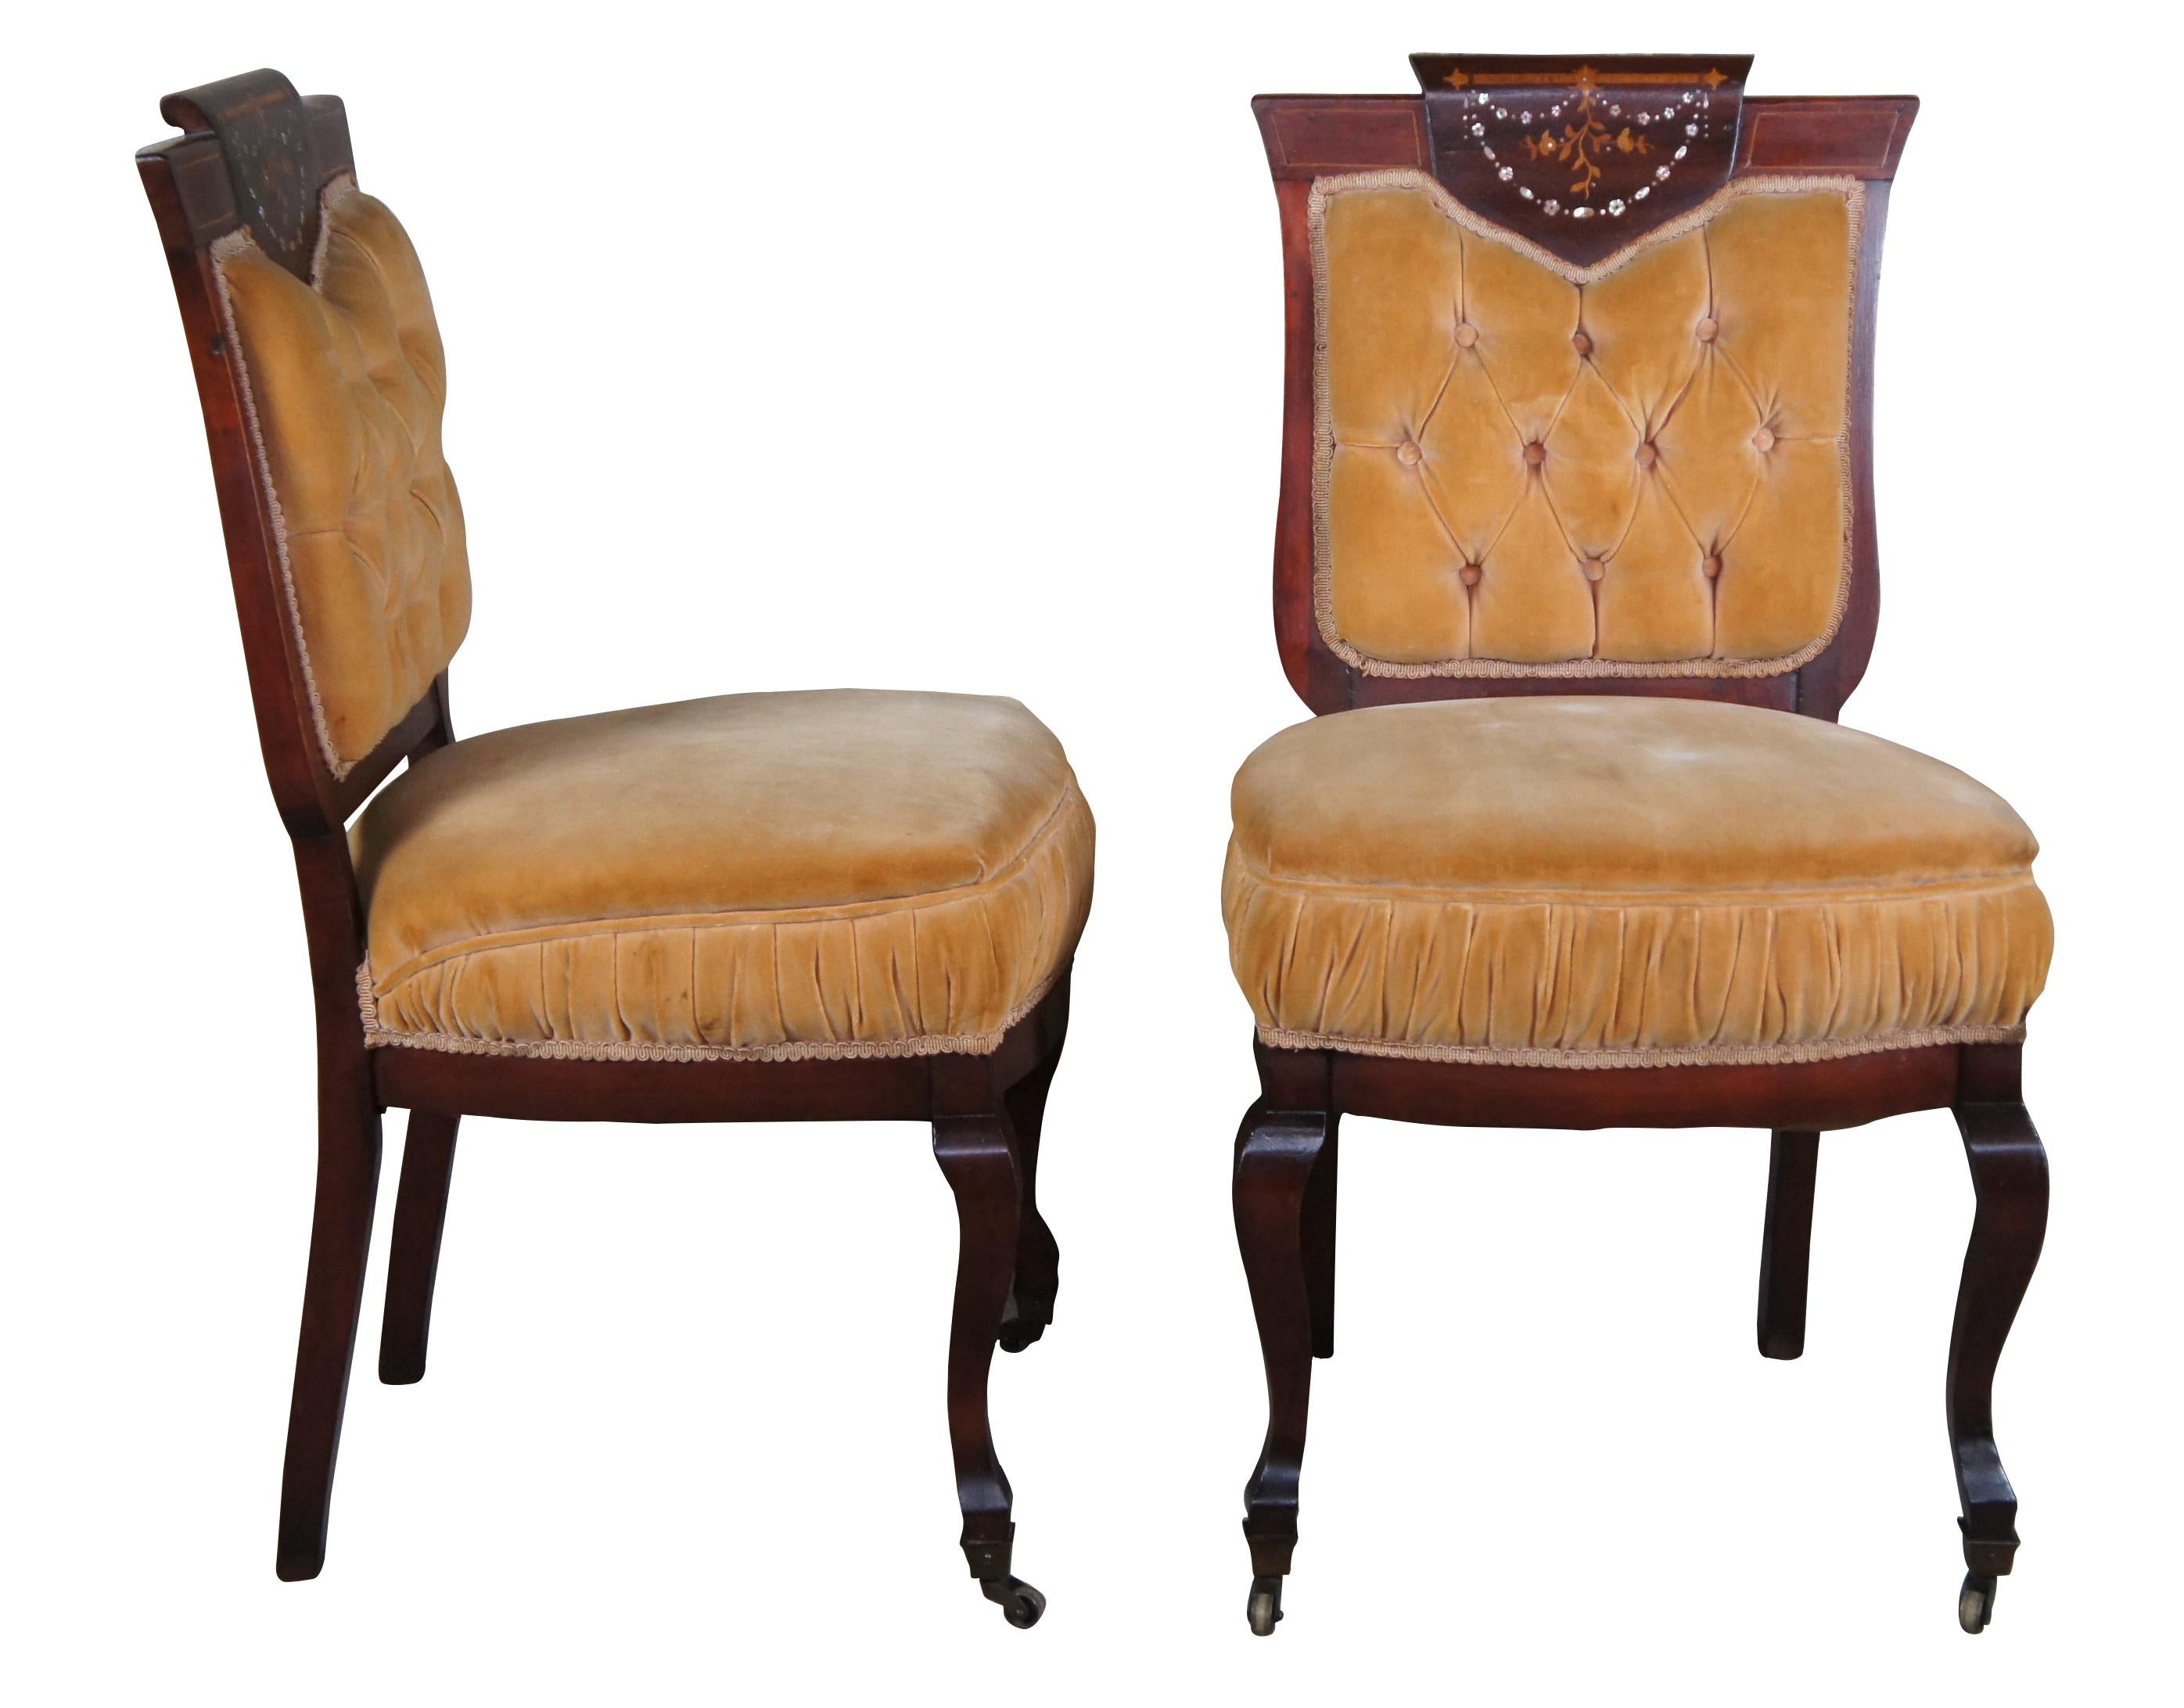 Gorgeous pair of early 20th century English Edwardian side chairs. Made from Mahogany with walnut inlaid floral marquetry and Mother of Pearl Inlay. Chair backs are shield shaped with banding and tufted upholstery. Legs are square tapered leading to